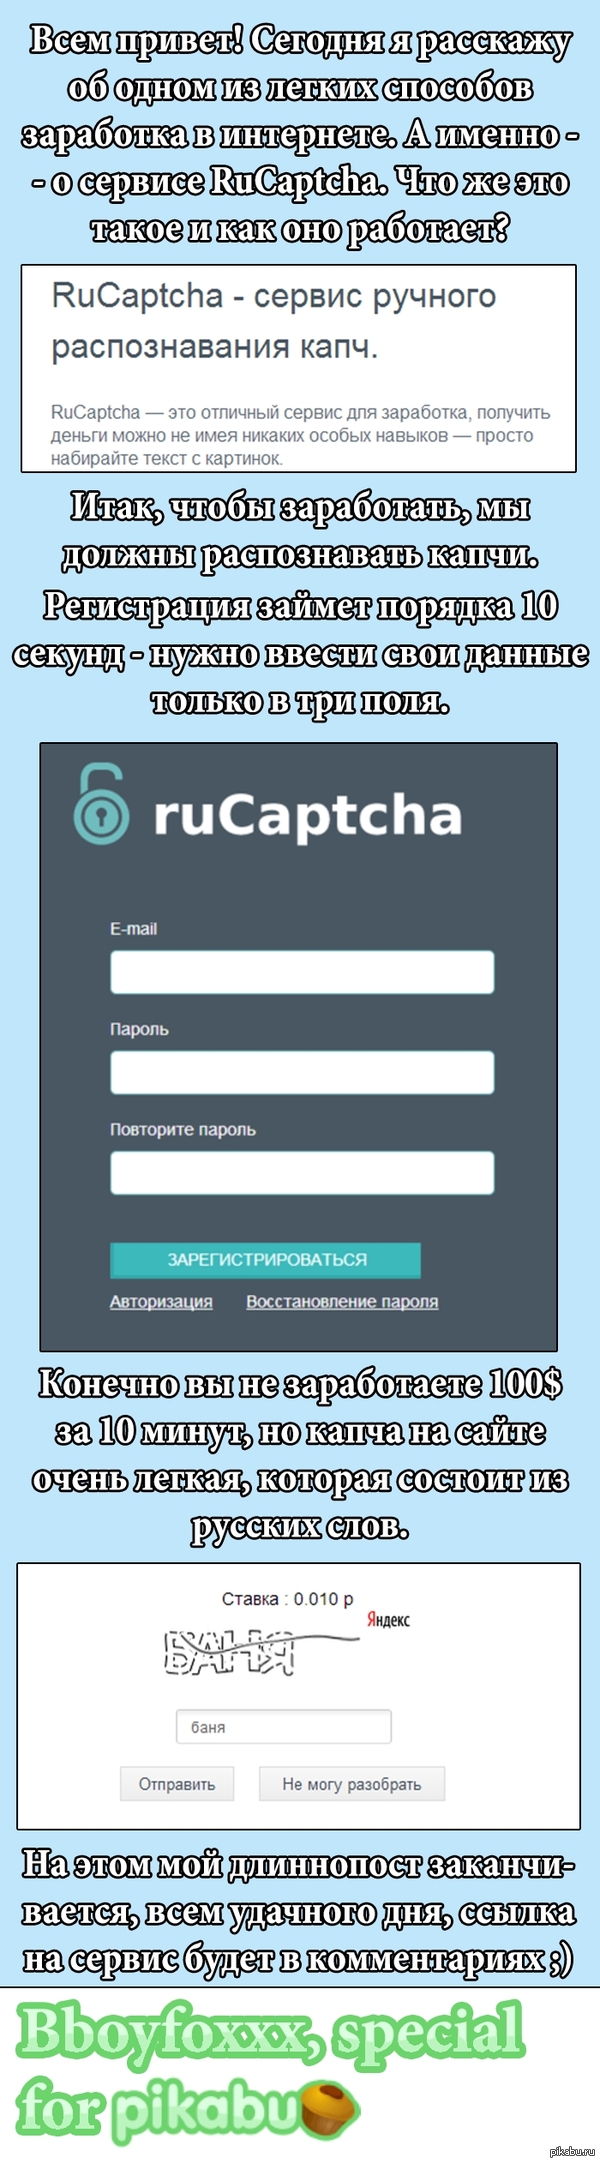      - http://rucaptcha.com/?from=111136